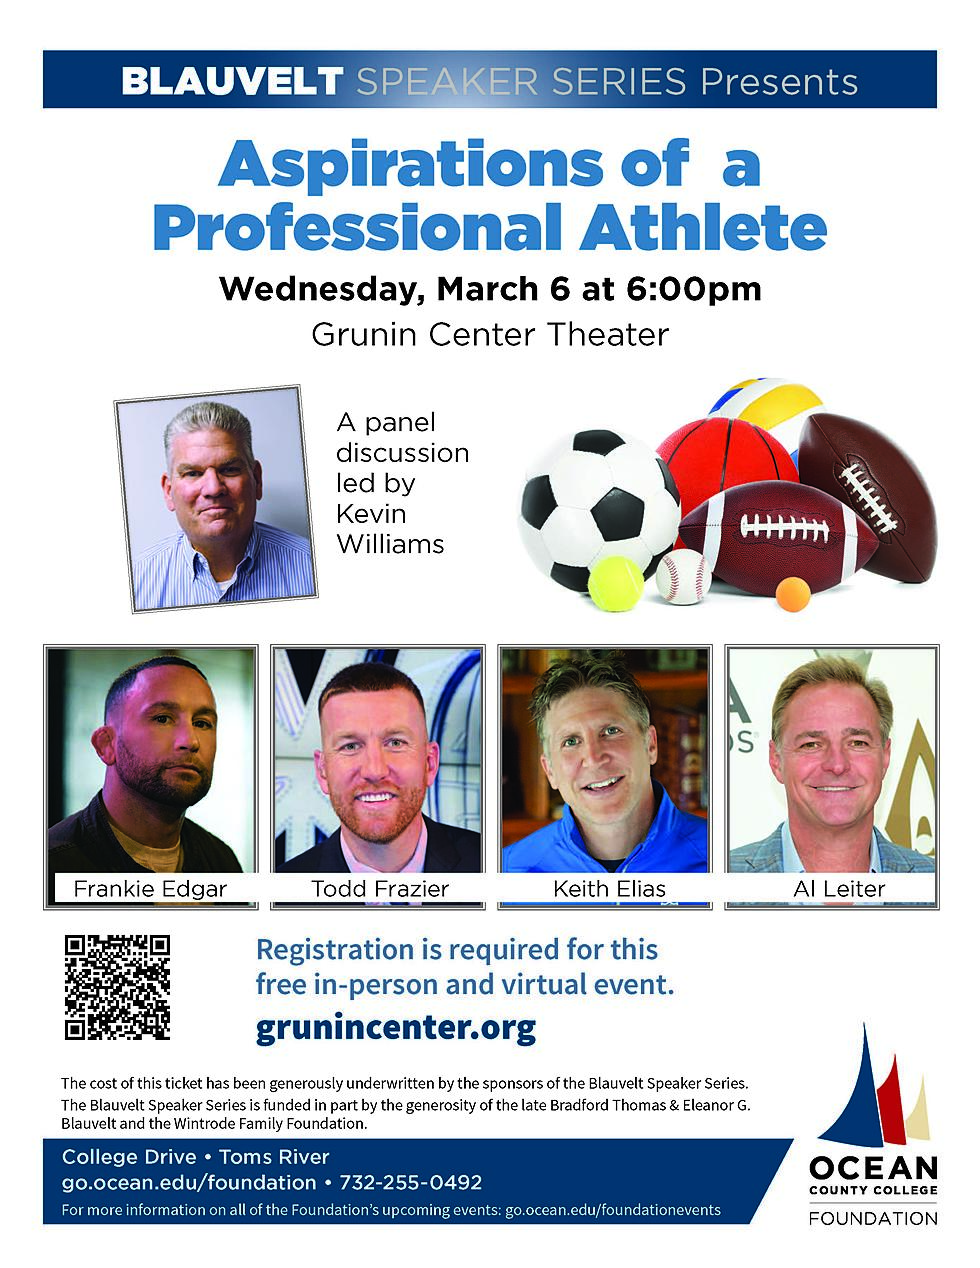 OCC To Host Panel Discussion With Former Local Pro Athletes